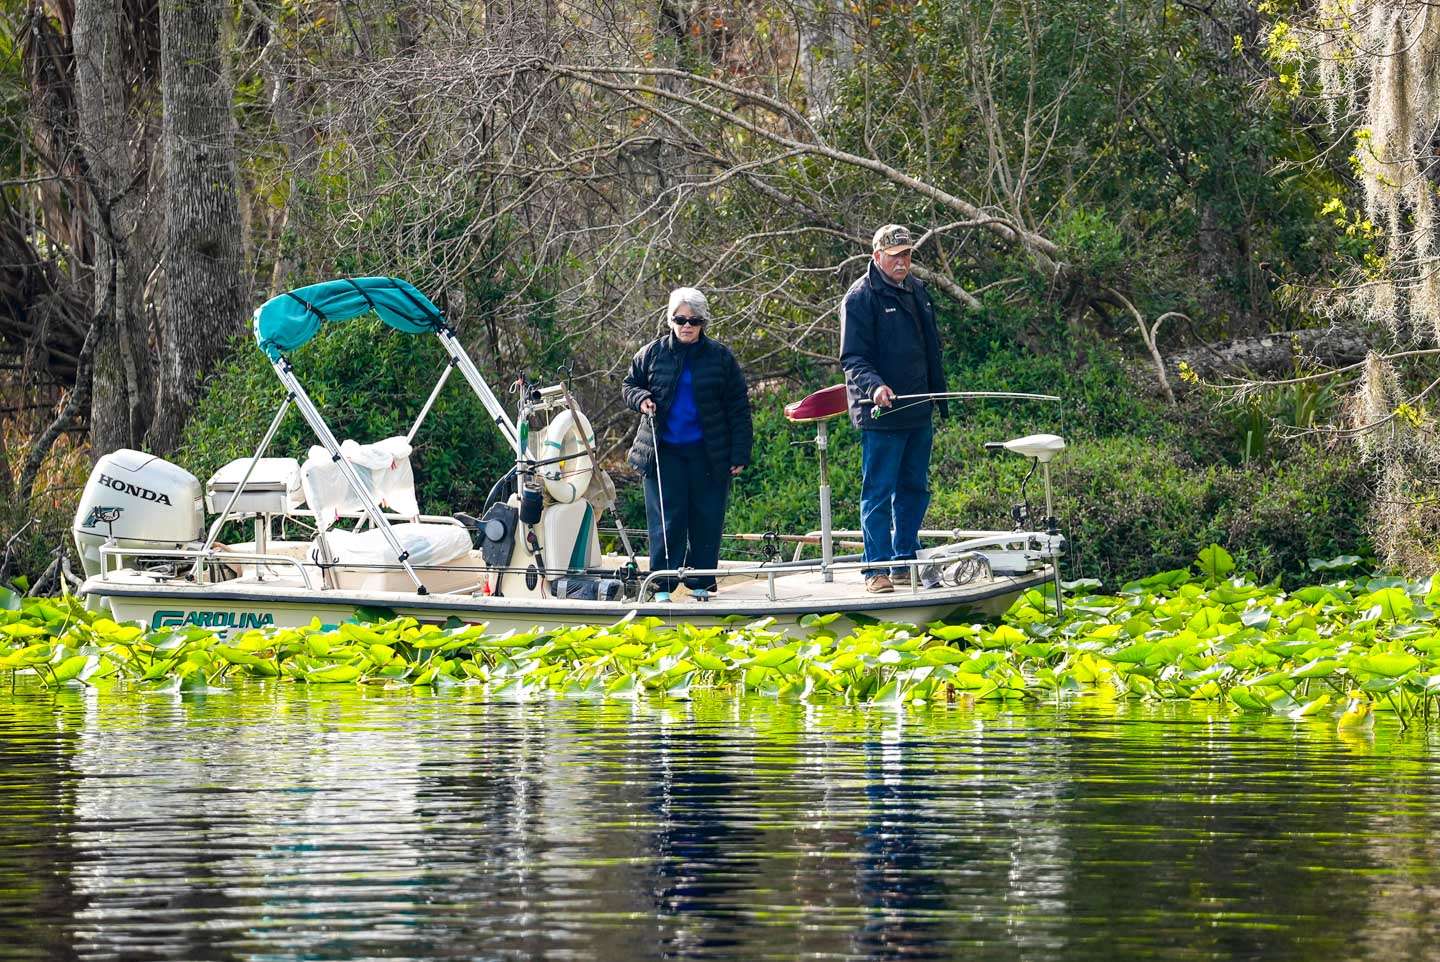 A beautiful day had the locals out enjoying the St. Johns River on Day 3. 